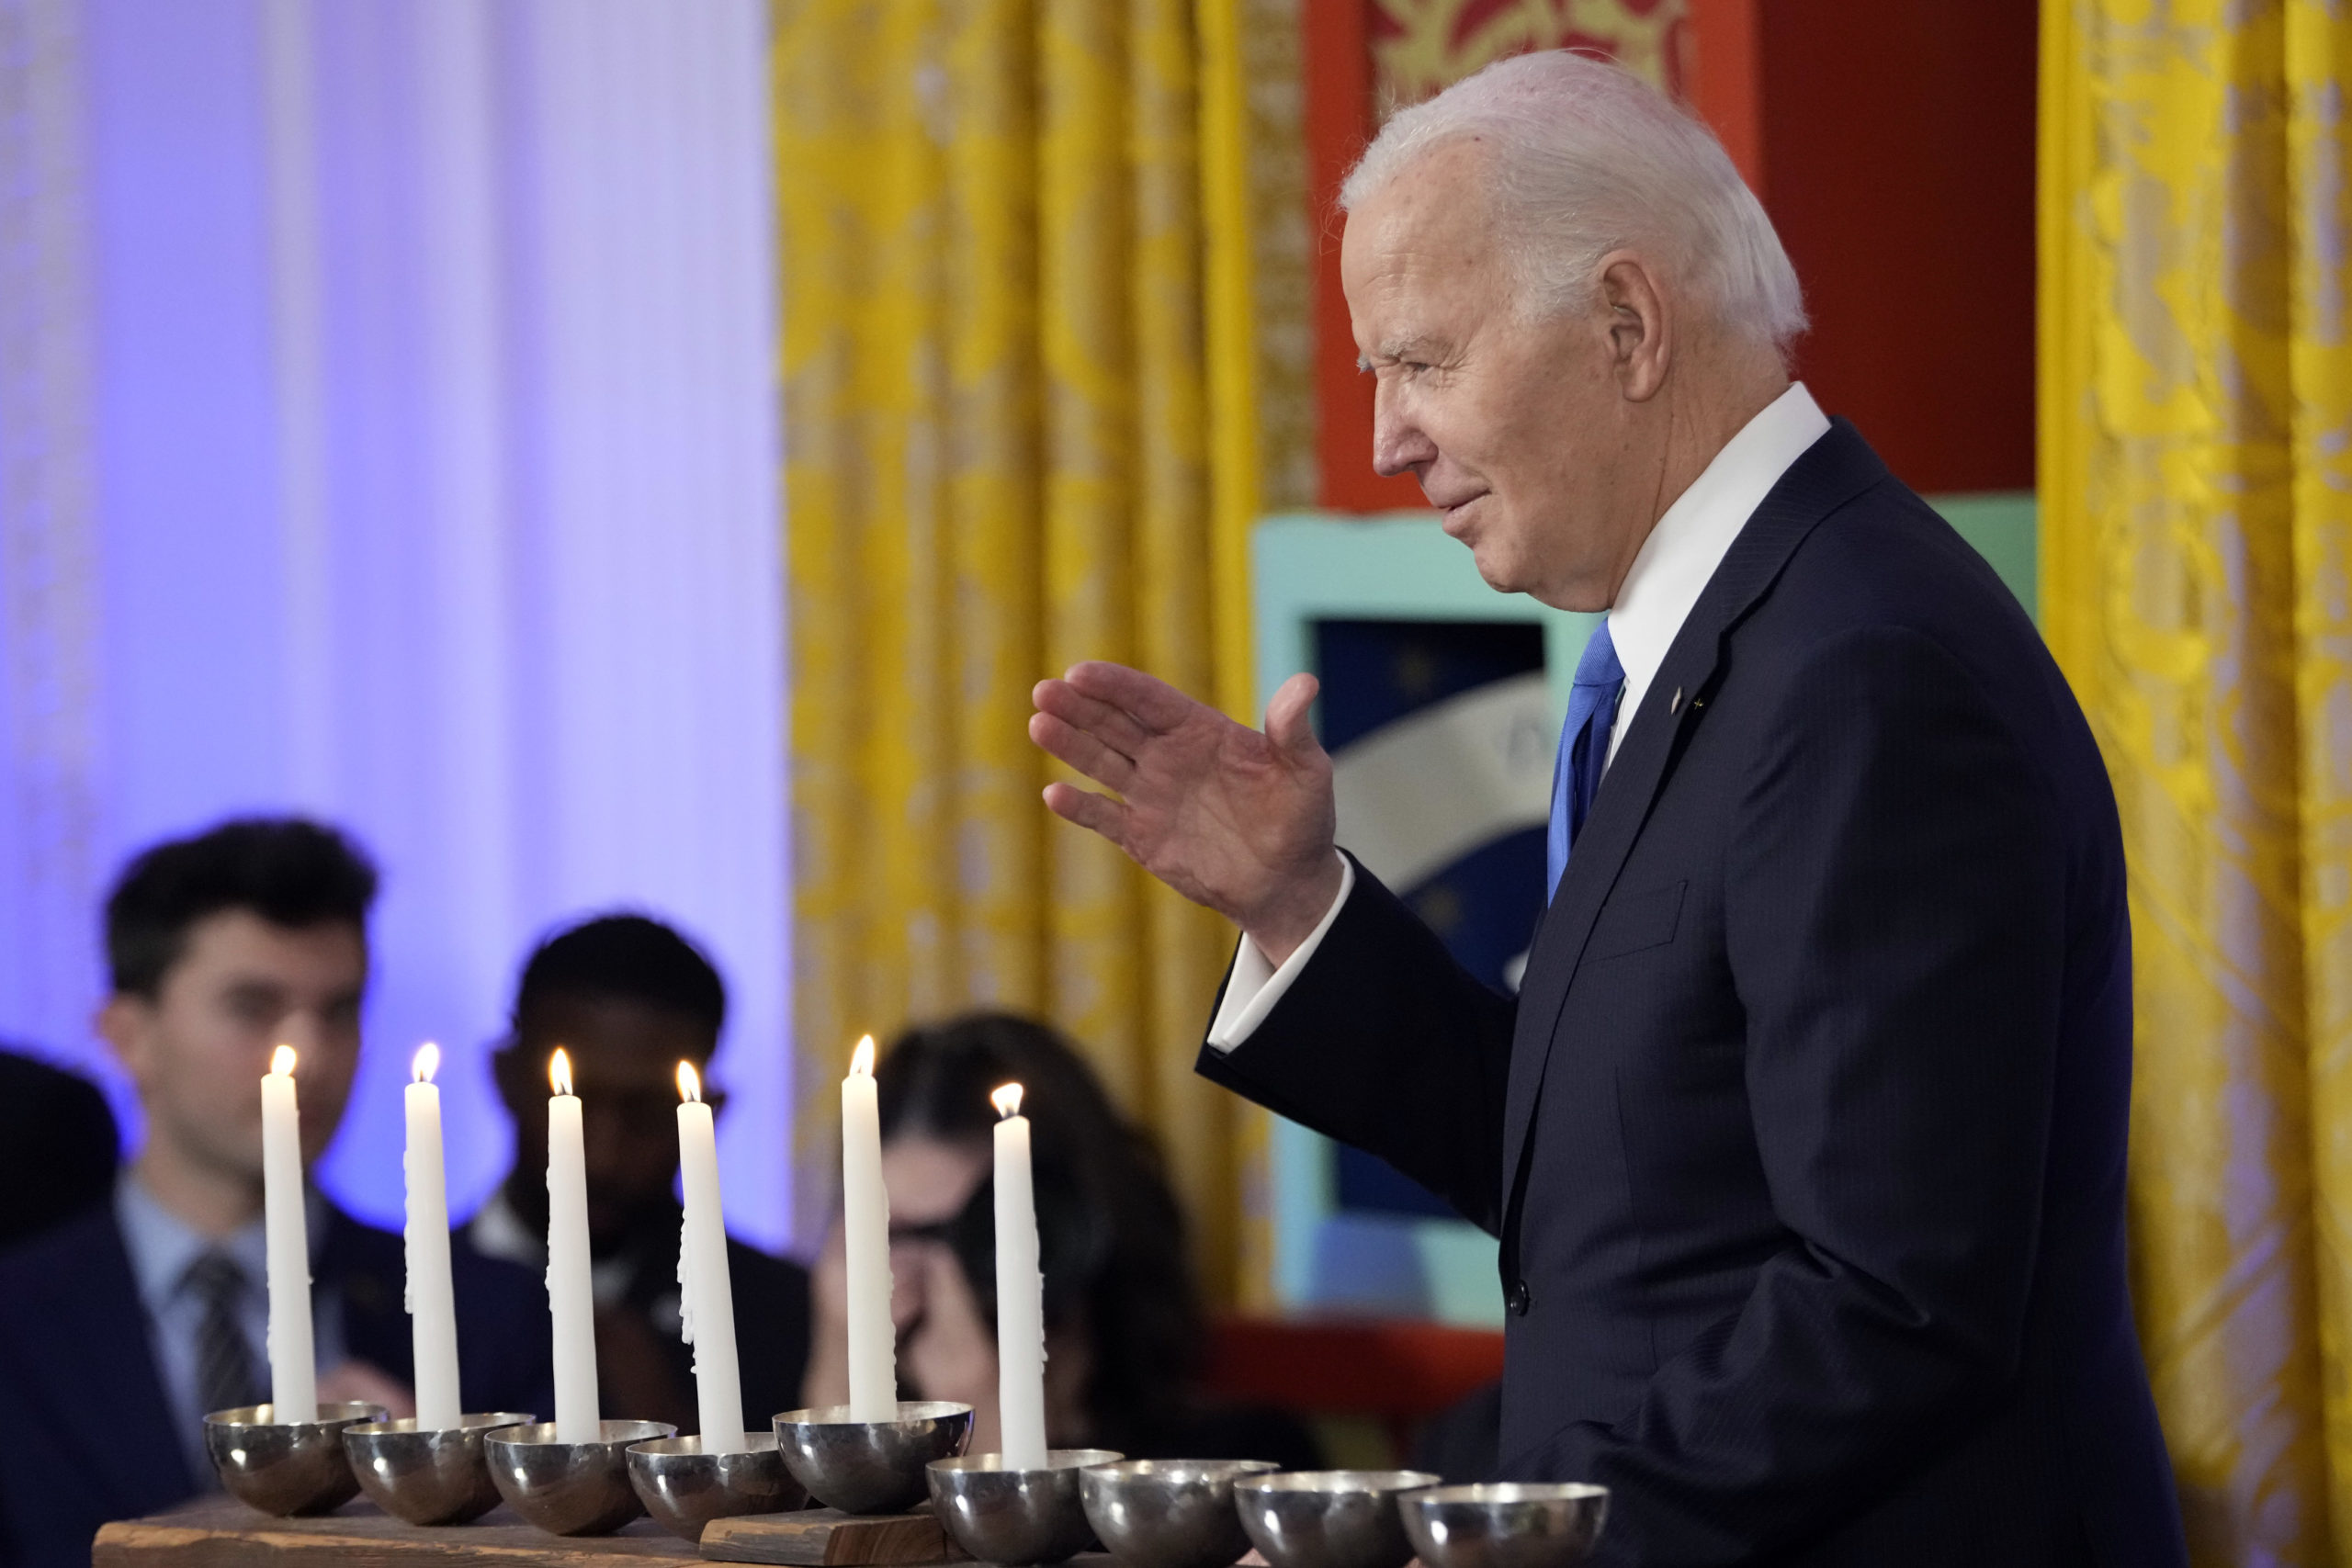 President Joe Biden speaks at a Hanukkah reception in the East Room of the White House on December 11, 2023 in Washington, DC. President Biden and first lady Jill Biden host a reception to mark the Jewish holidays. (Photo by Jacquelyn Martin - Pool/Getty Images)